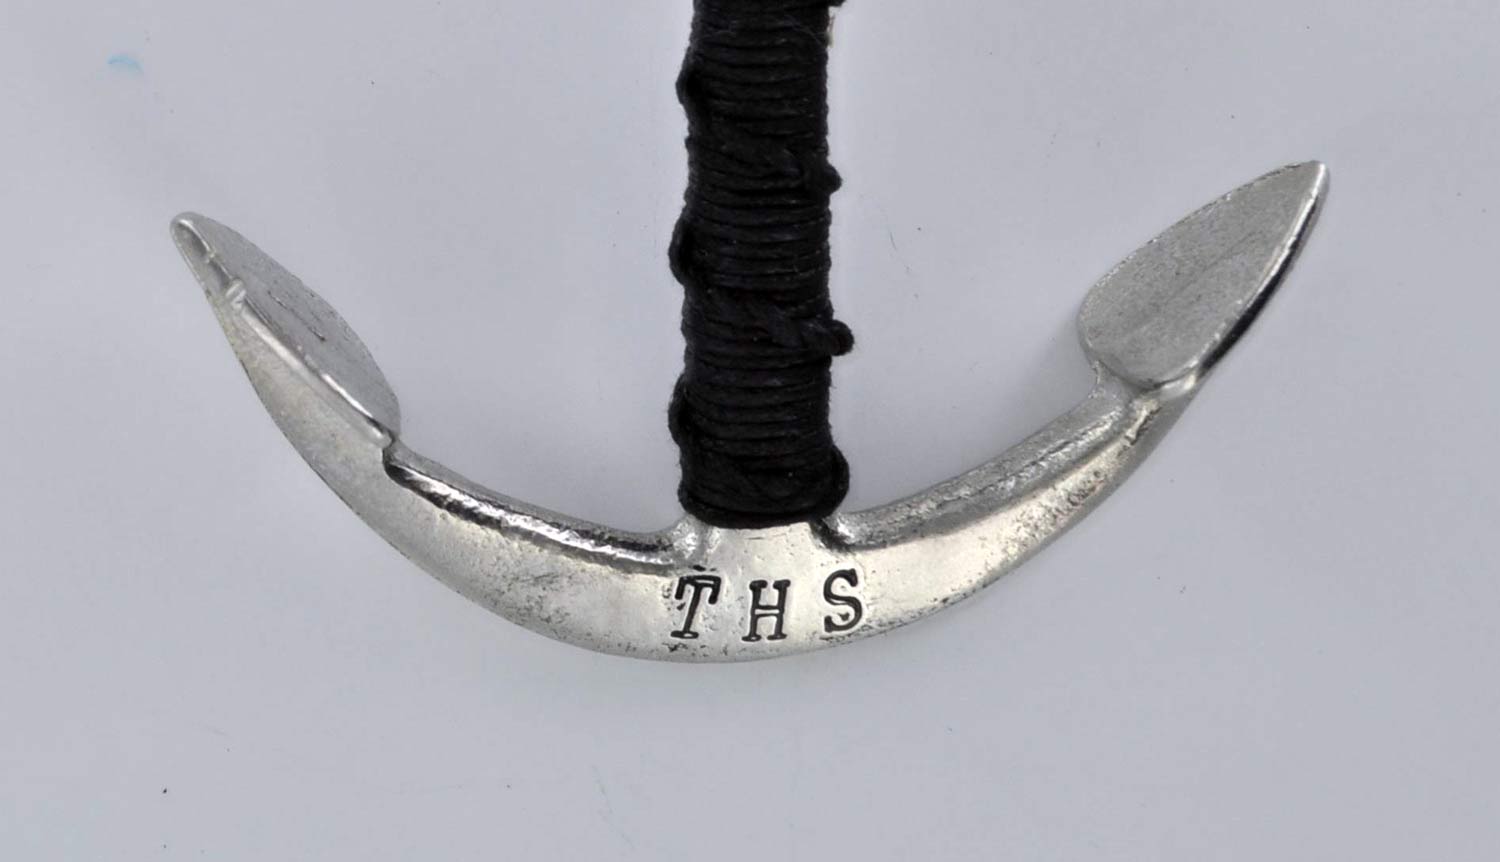 Engraved Pewter Anchor